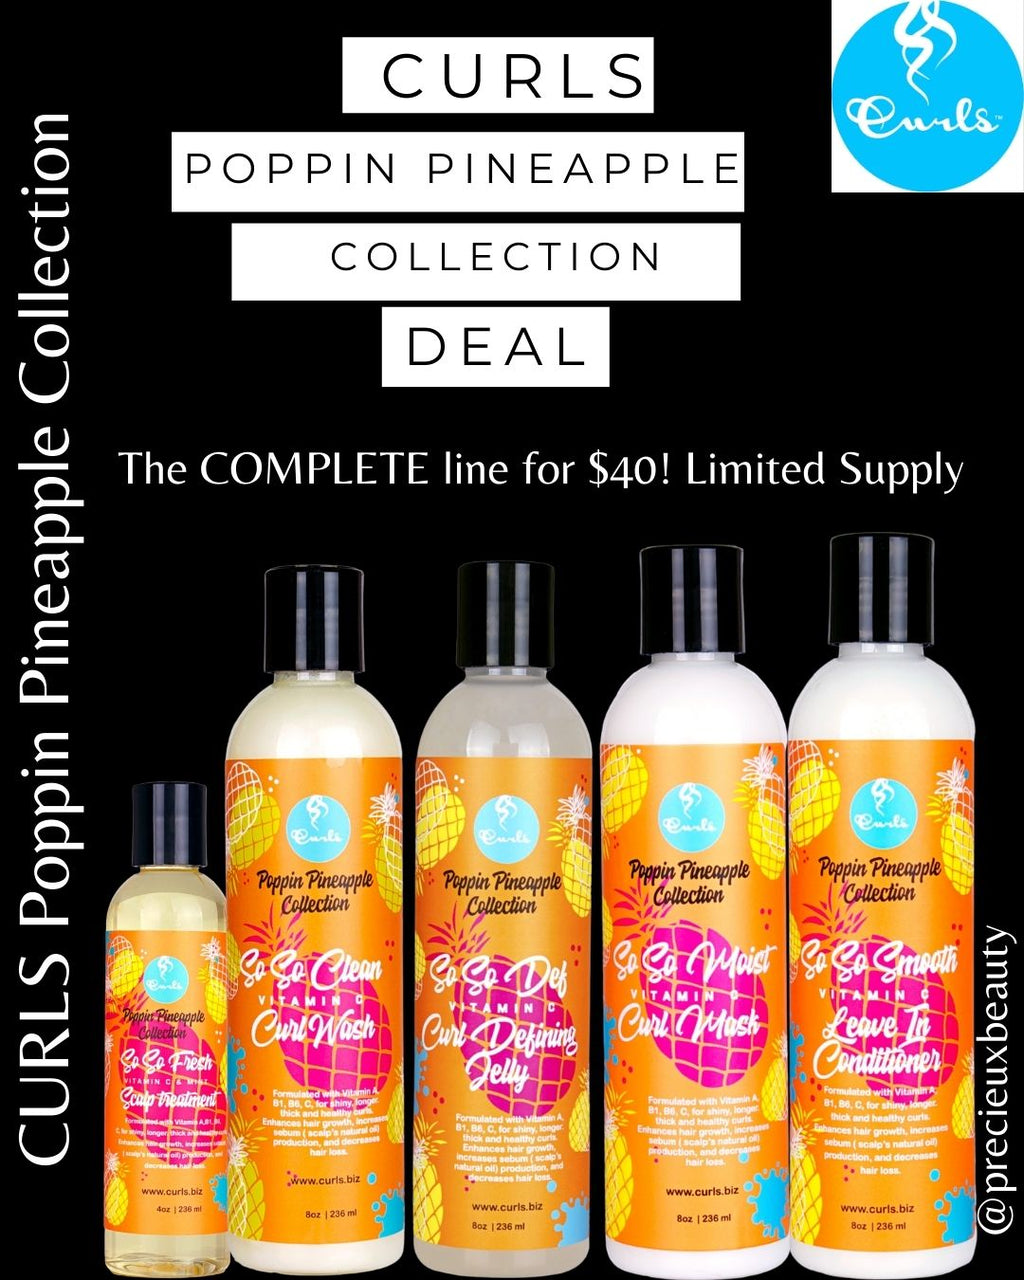 CURLS Poppin Pineapple Collection Deal